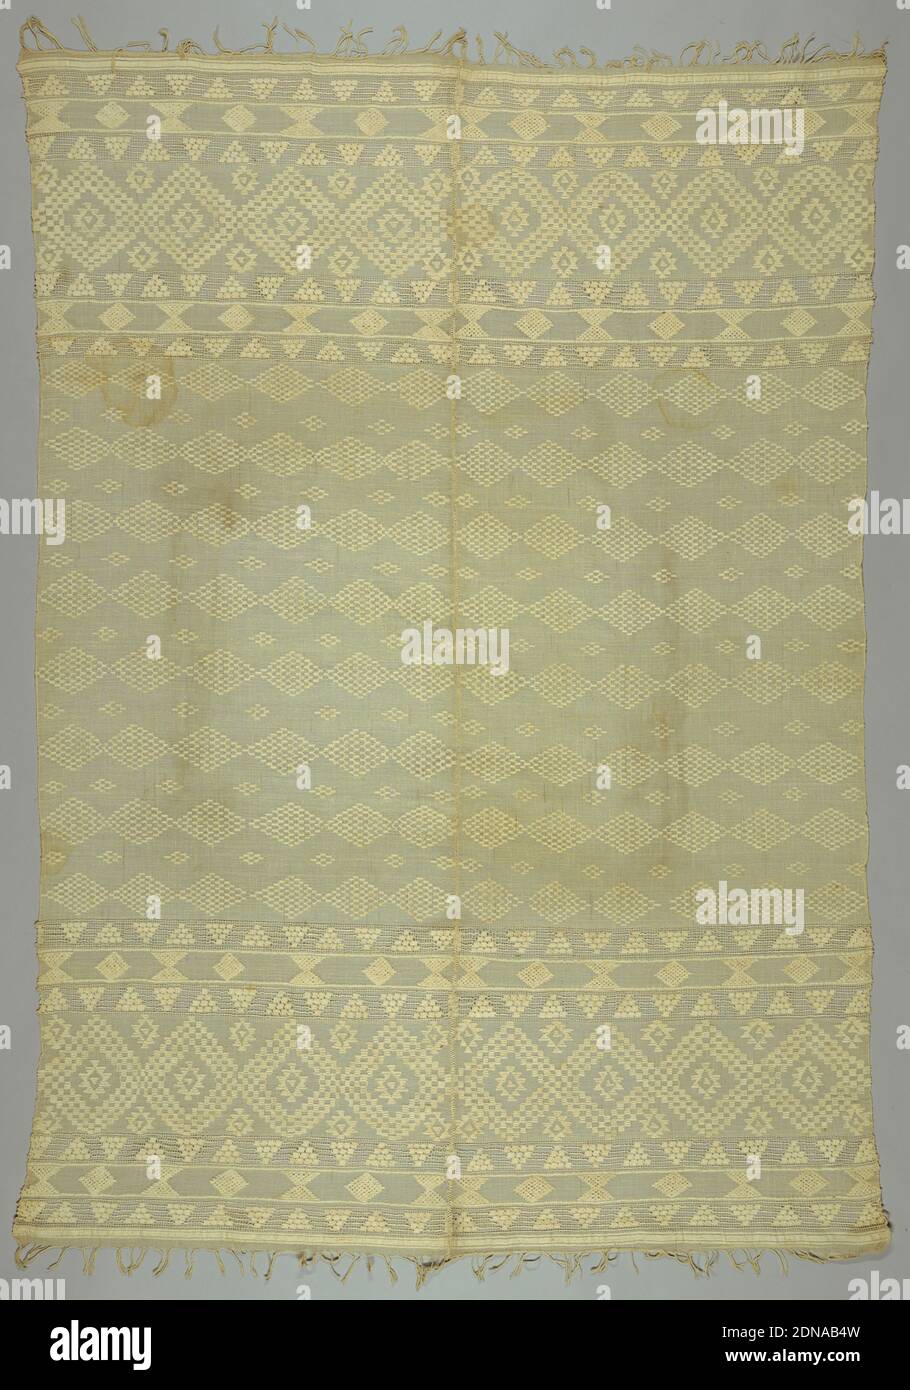 Textile, Medium: cotton Technique: woven, Two lengths of sheer cotton seamed down longest edge. Spaced bands of lozenges and triangles inlaid with heavier cotton thread. Deep borders edged with openwork bands at either end. Twisted warp fringe., Albania, late 19th–early 20th century, woven textiles, Textile Stock Photo